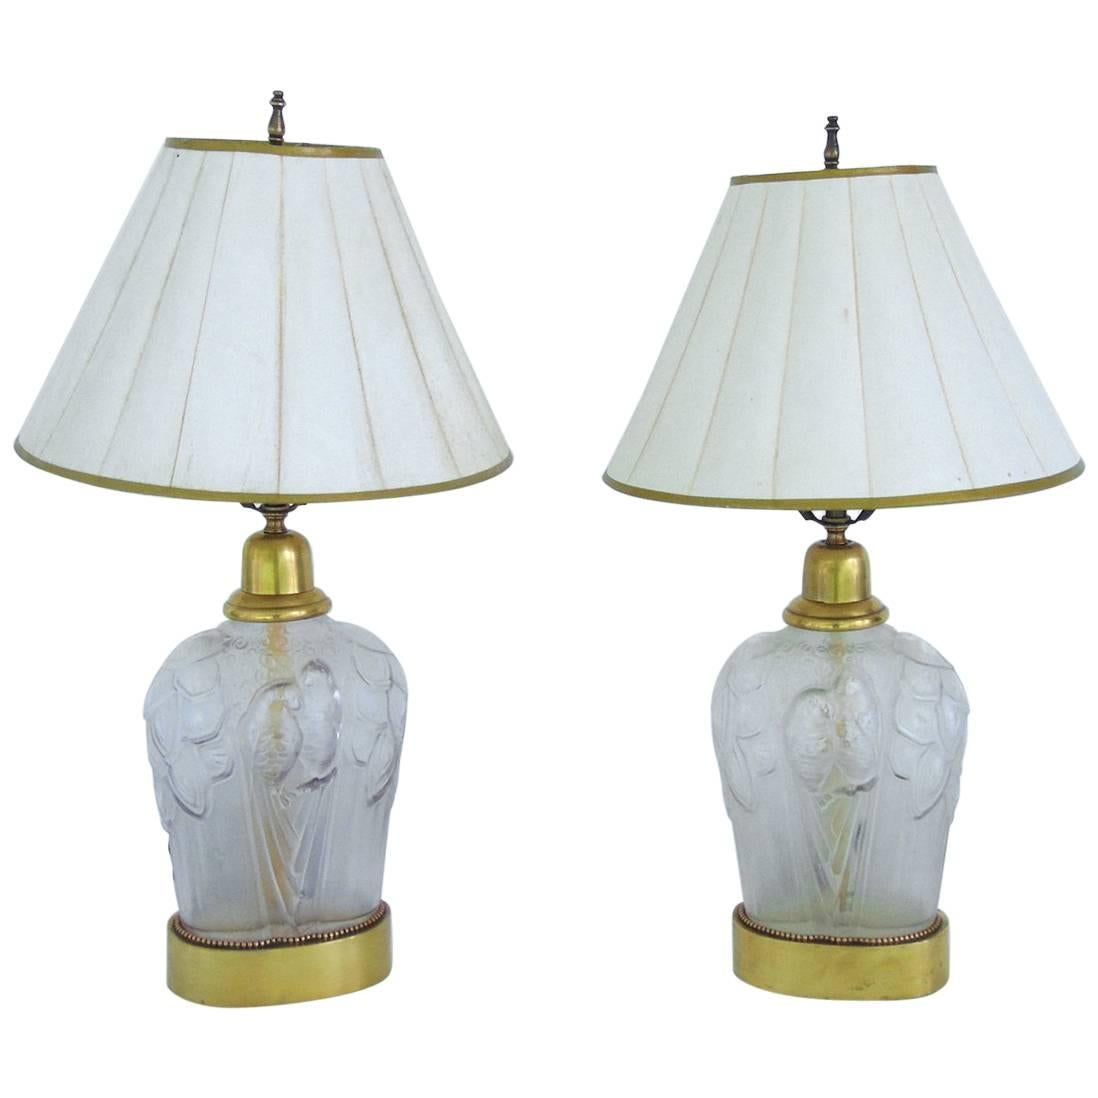 Pair of  French Art Deco Parrot Decorated Table Lamps